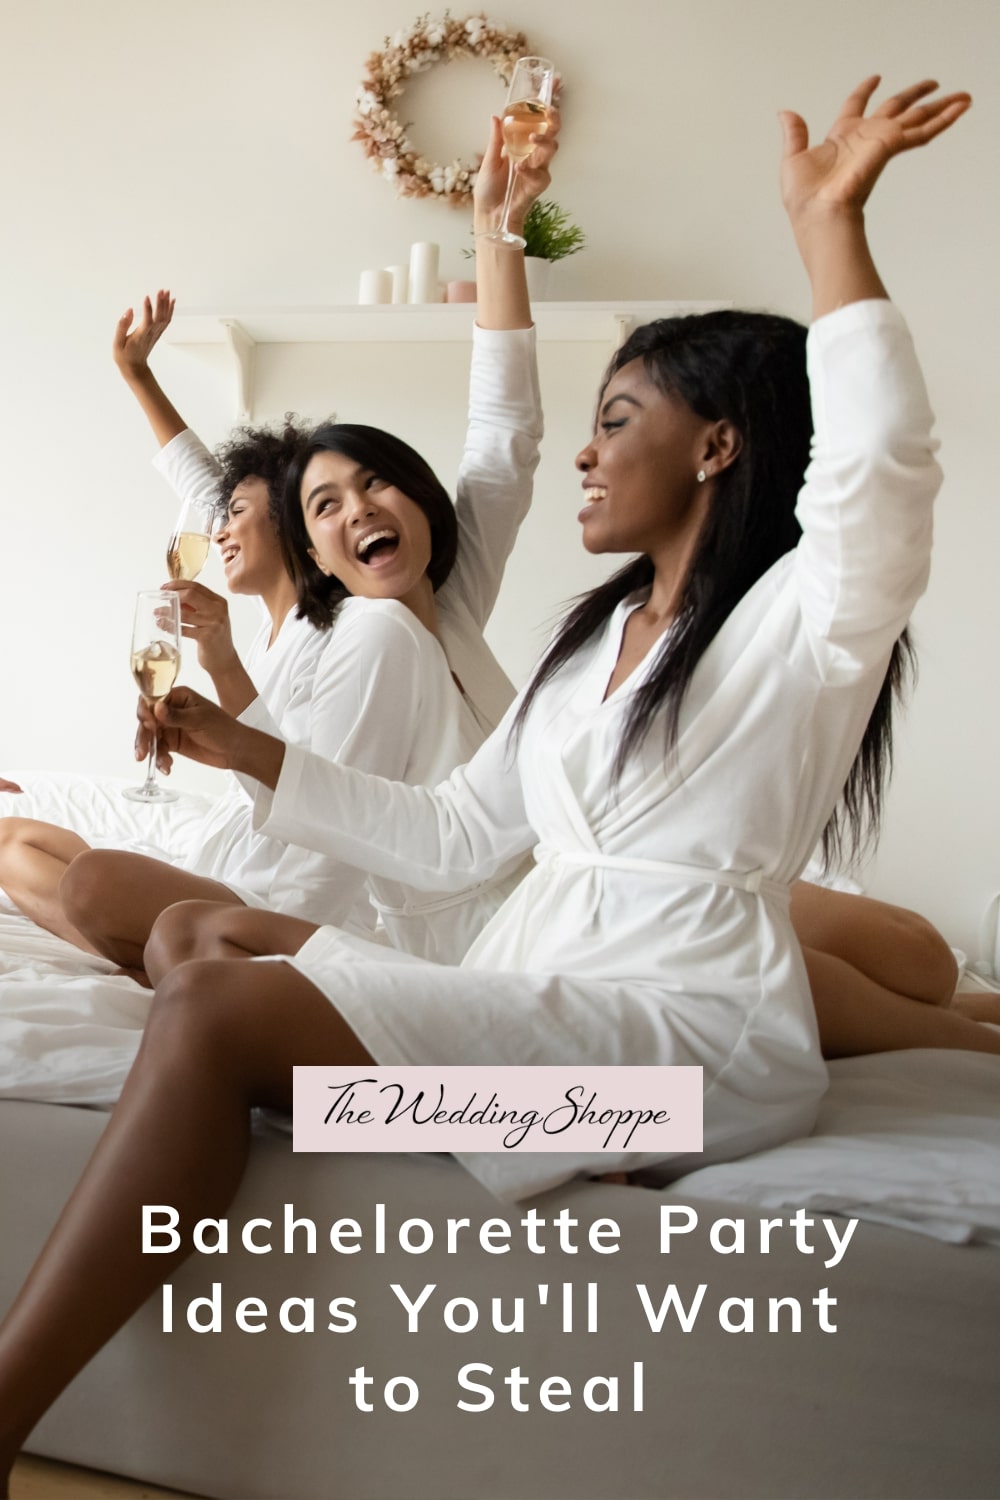 pinnable graphic for "Bachelorette Party Ideas You'll Want to Steal" from The Wedding Shoppe